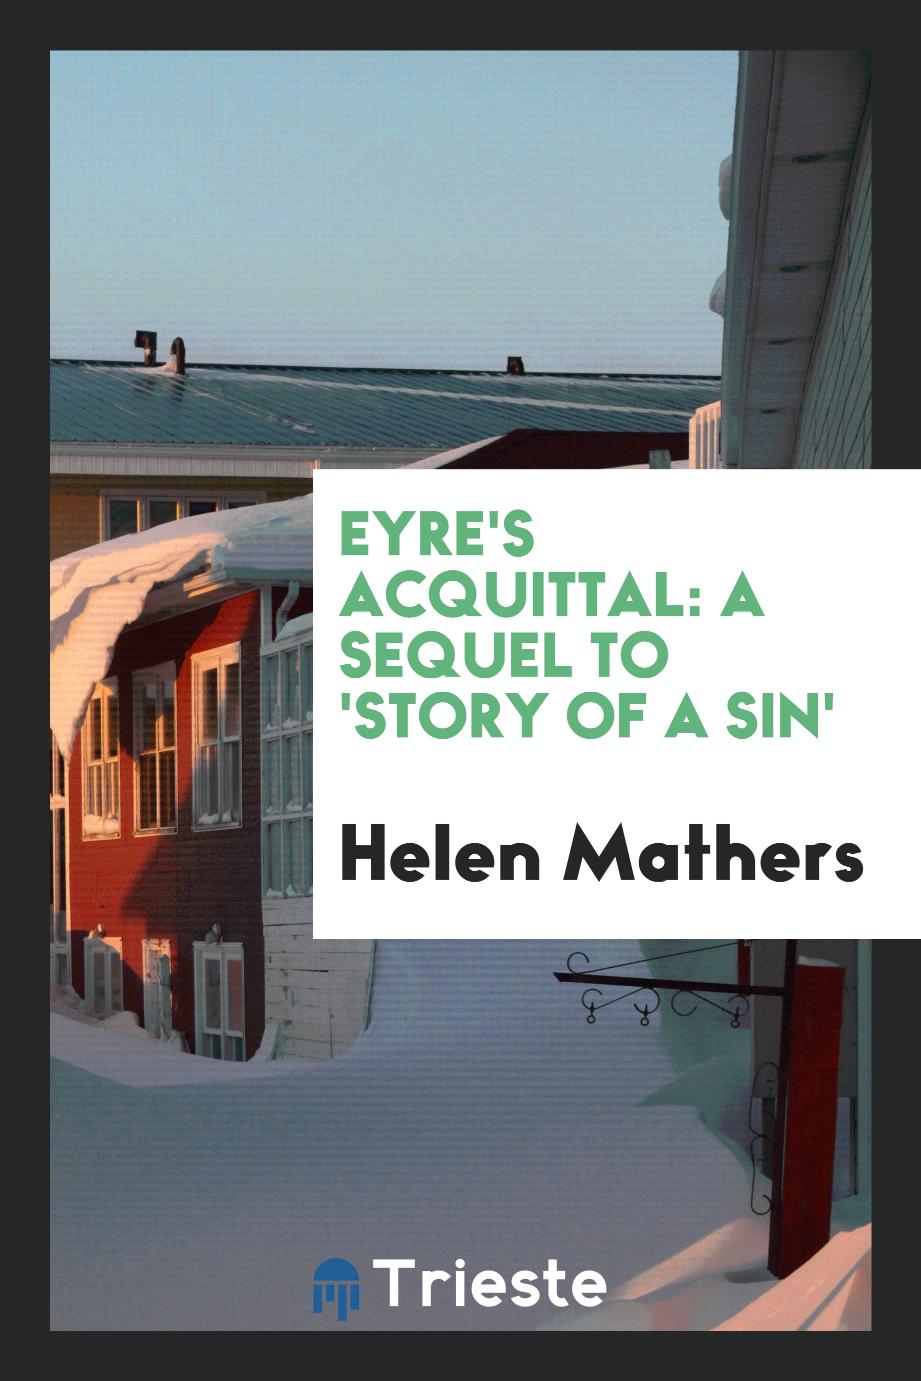 Eyre's acquittal: A sequel to 'Story of a sin'